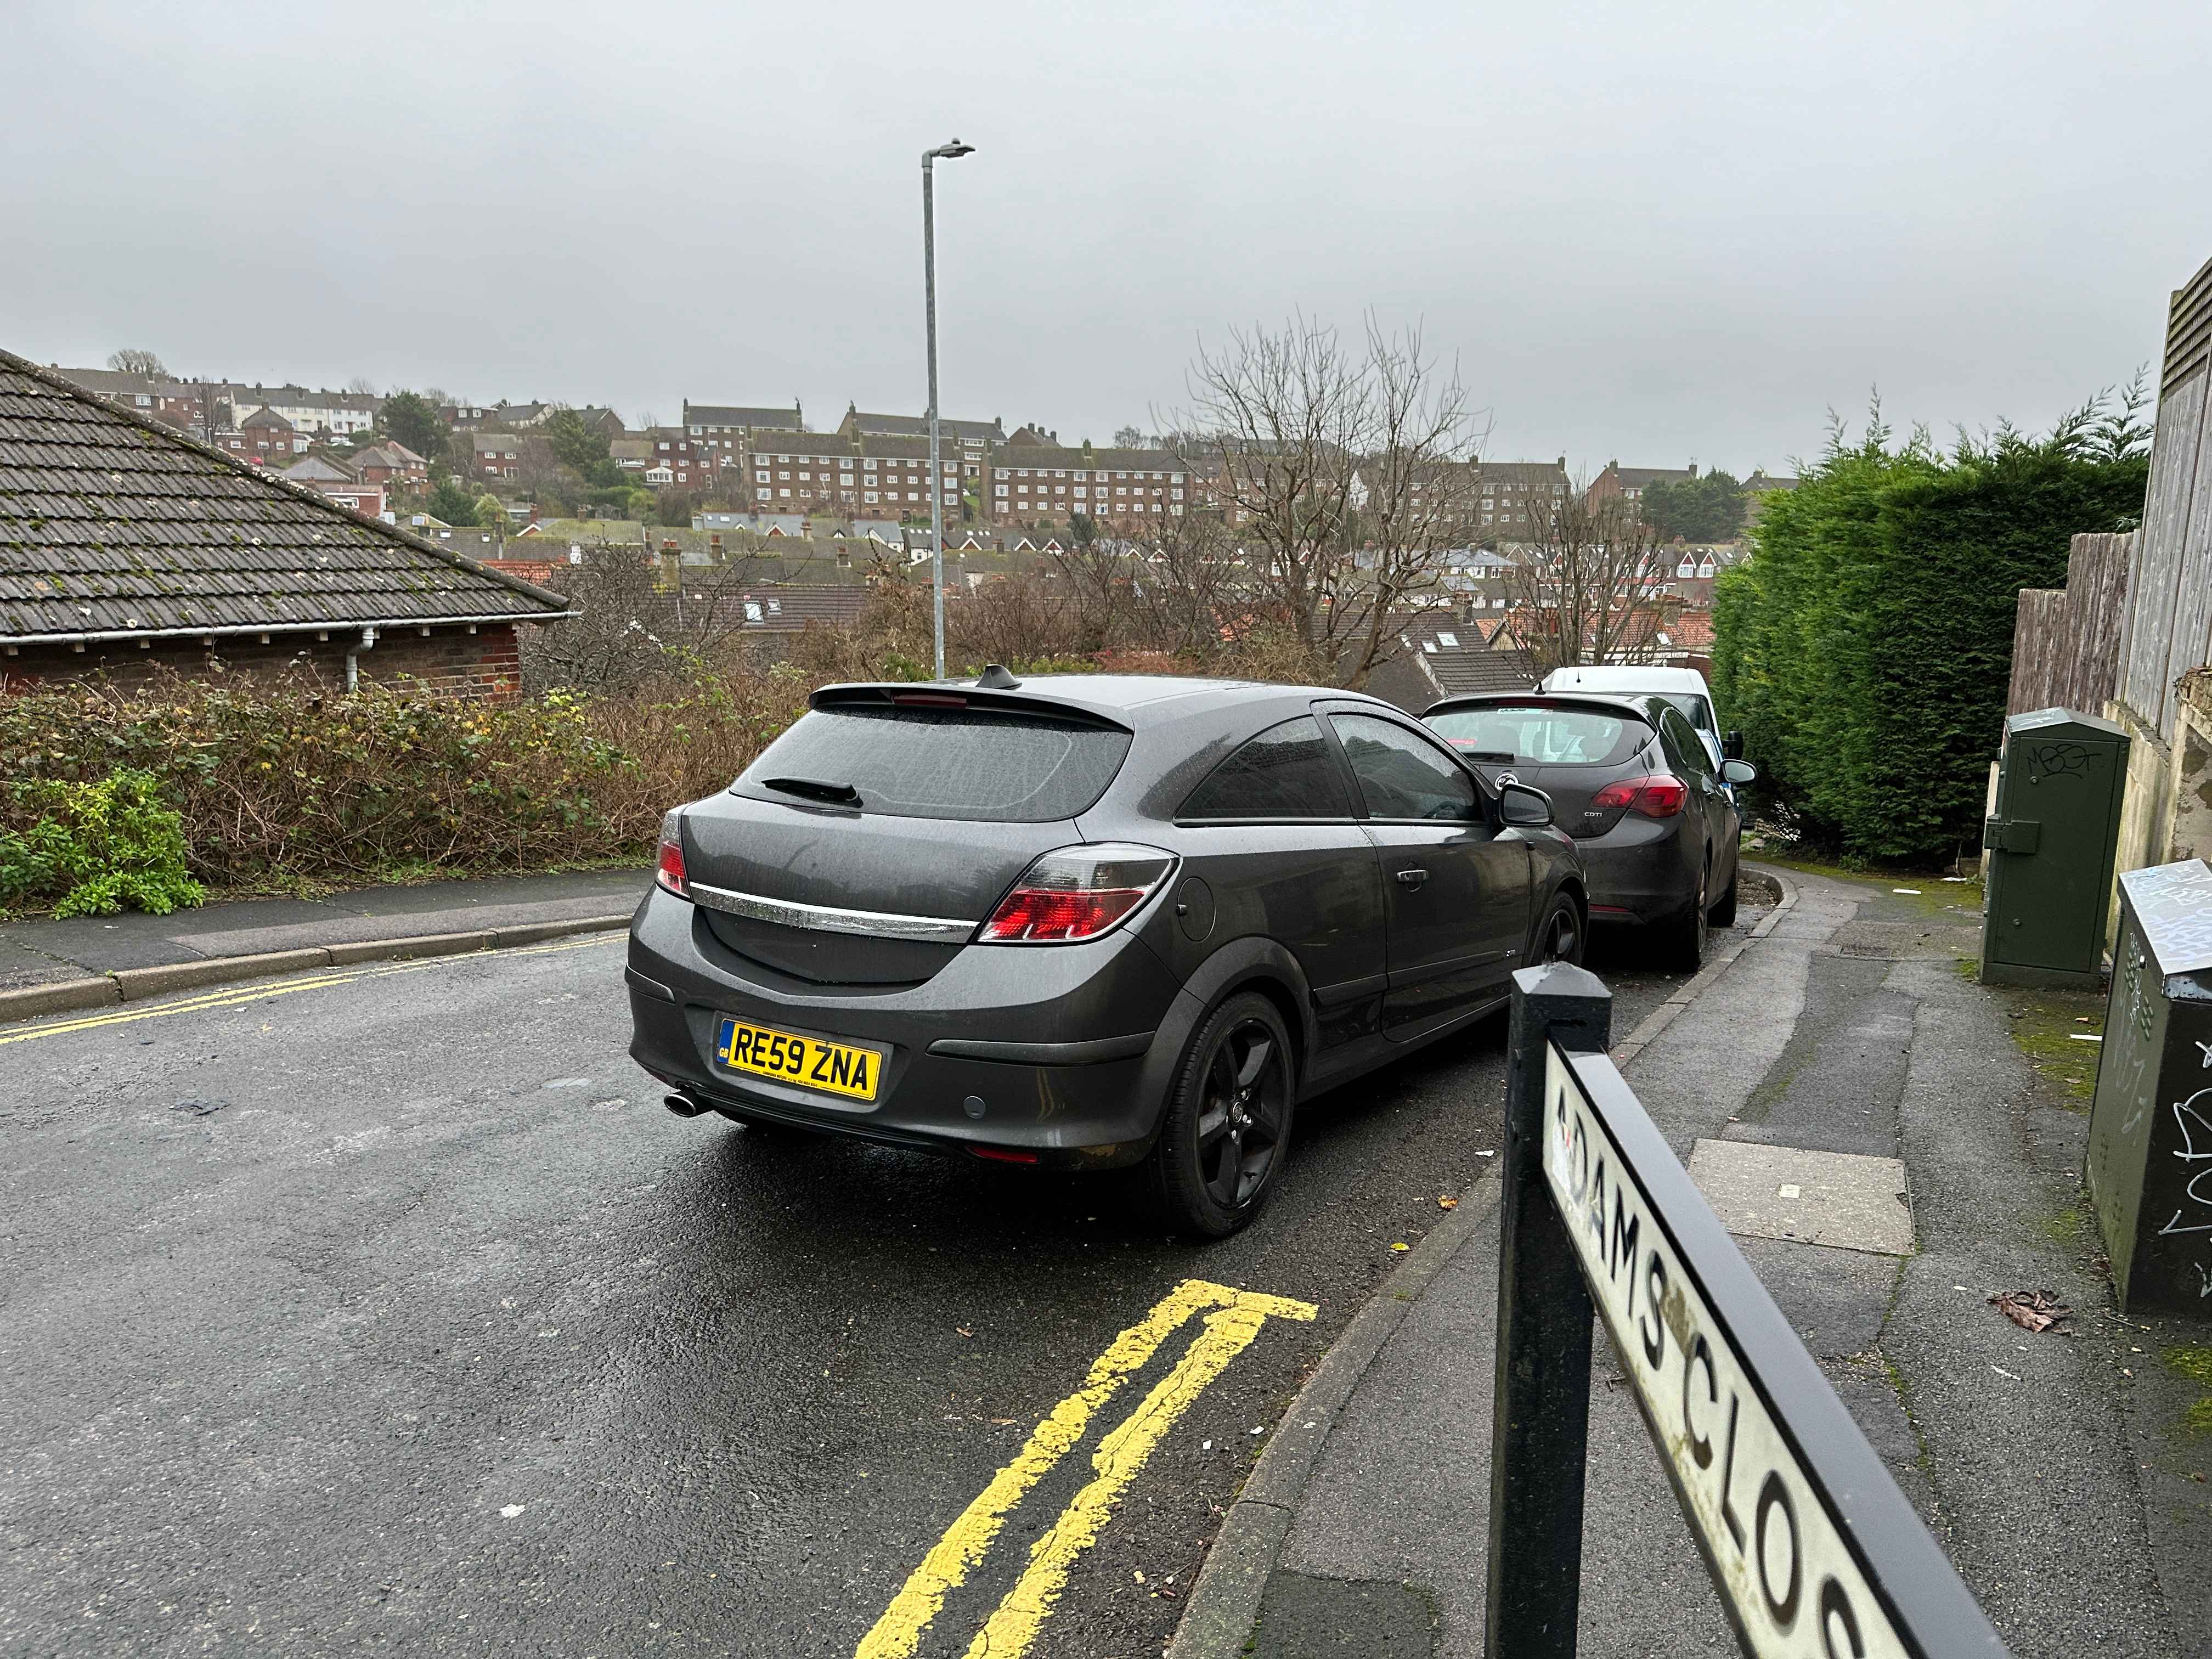 Photograph of RE59 ZNA - a Grey Vauxhall Astra parked in Hollingdean by a non-resident. The second of five photographs supplied by the residents of Hollingdean.